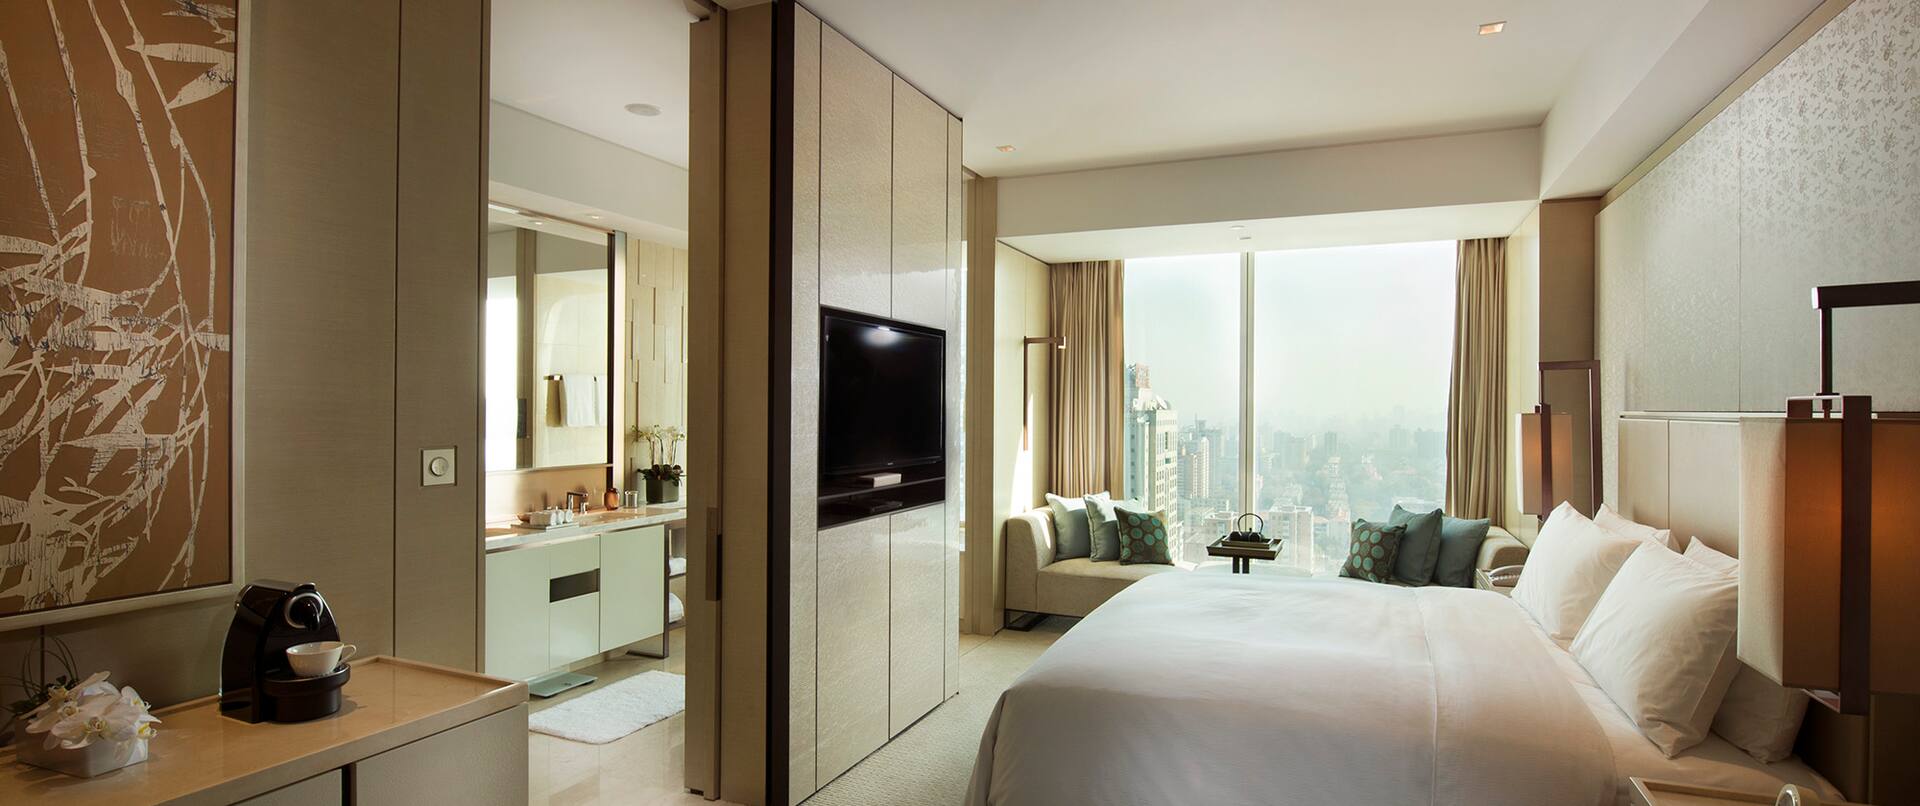 King-Sized Bed and Large Window in Deluxe Room